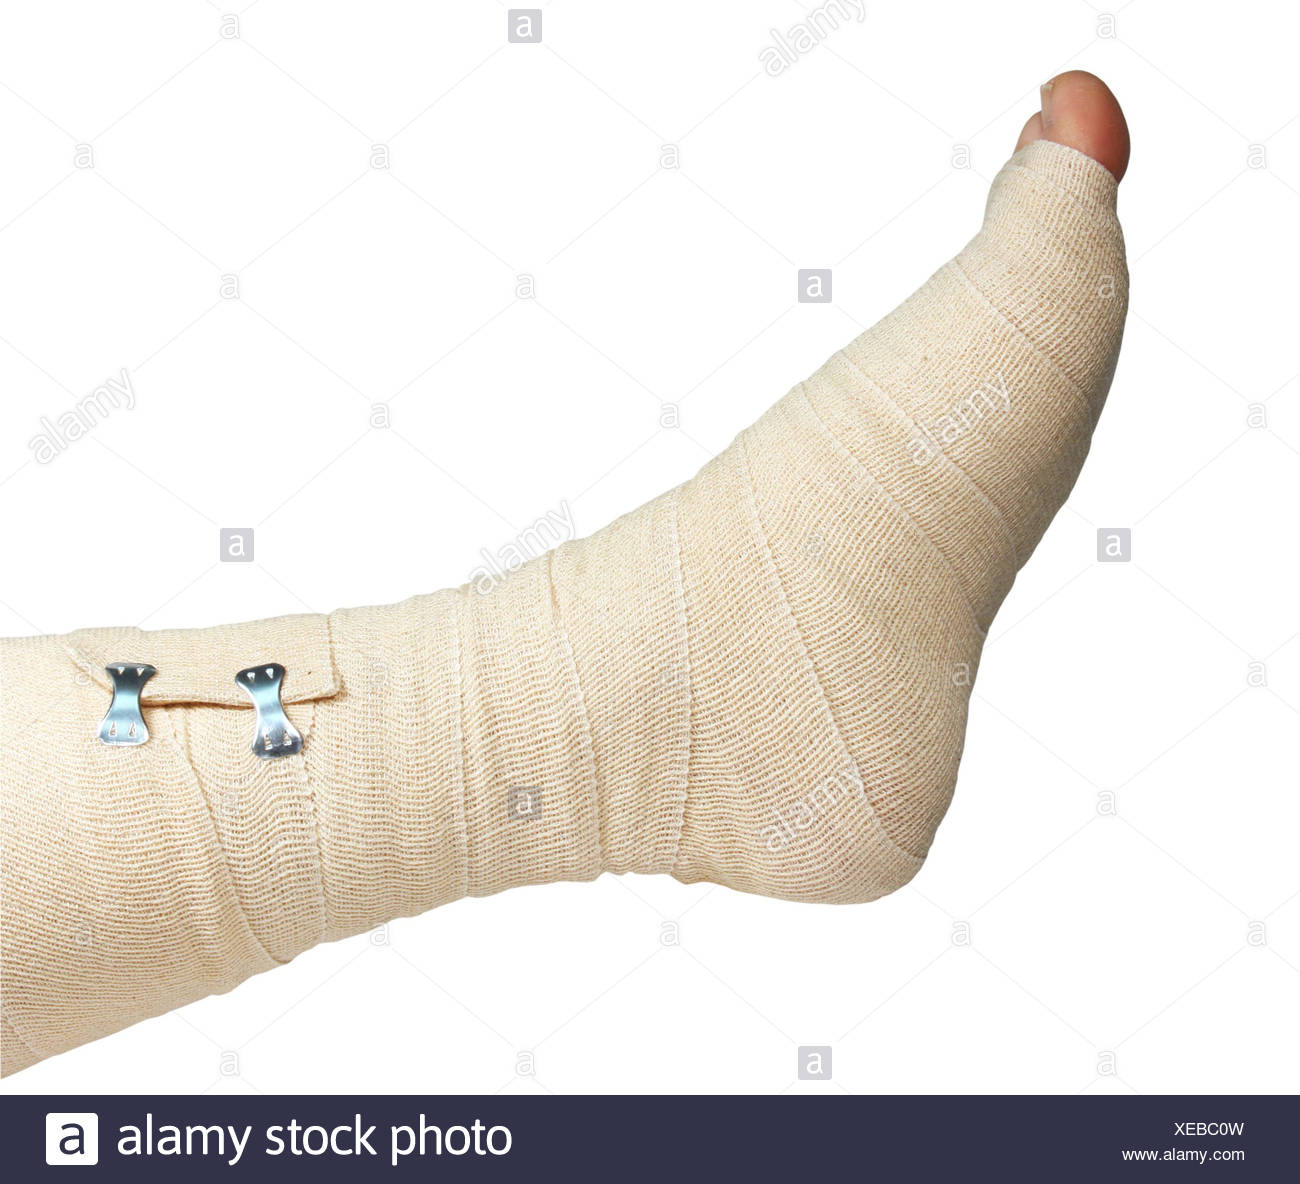 Page 3 Foot Bandage High Resolution Stock Photography And Images Alamy